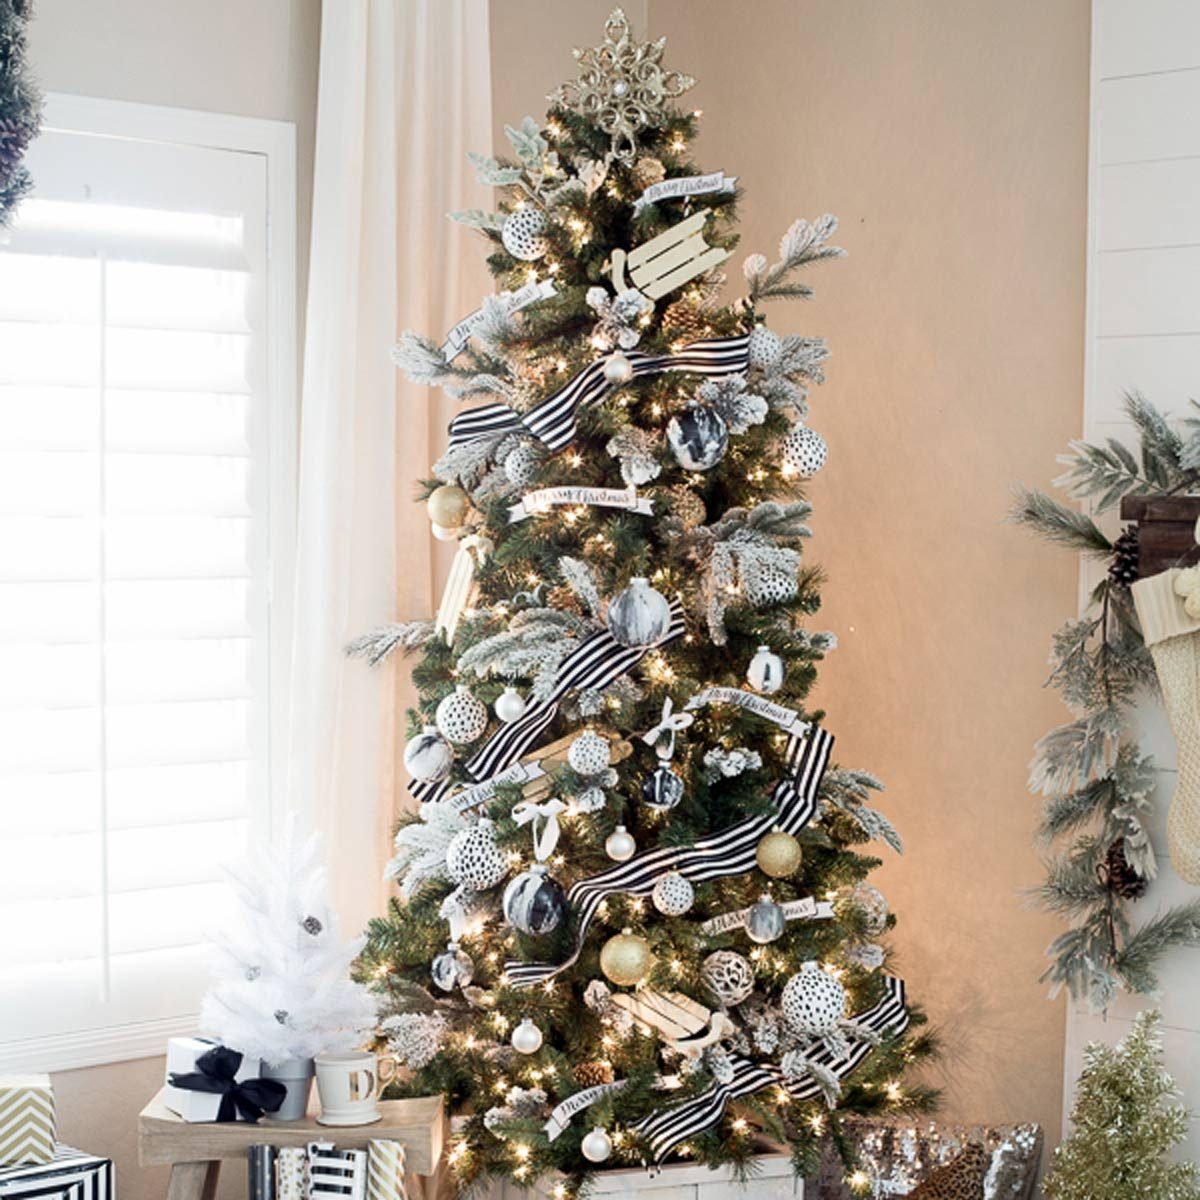 Minimalist Black And White Christmas Tree for Small Space